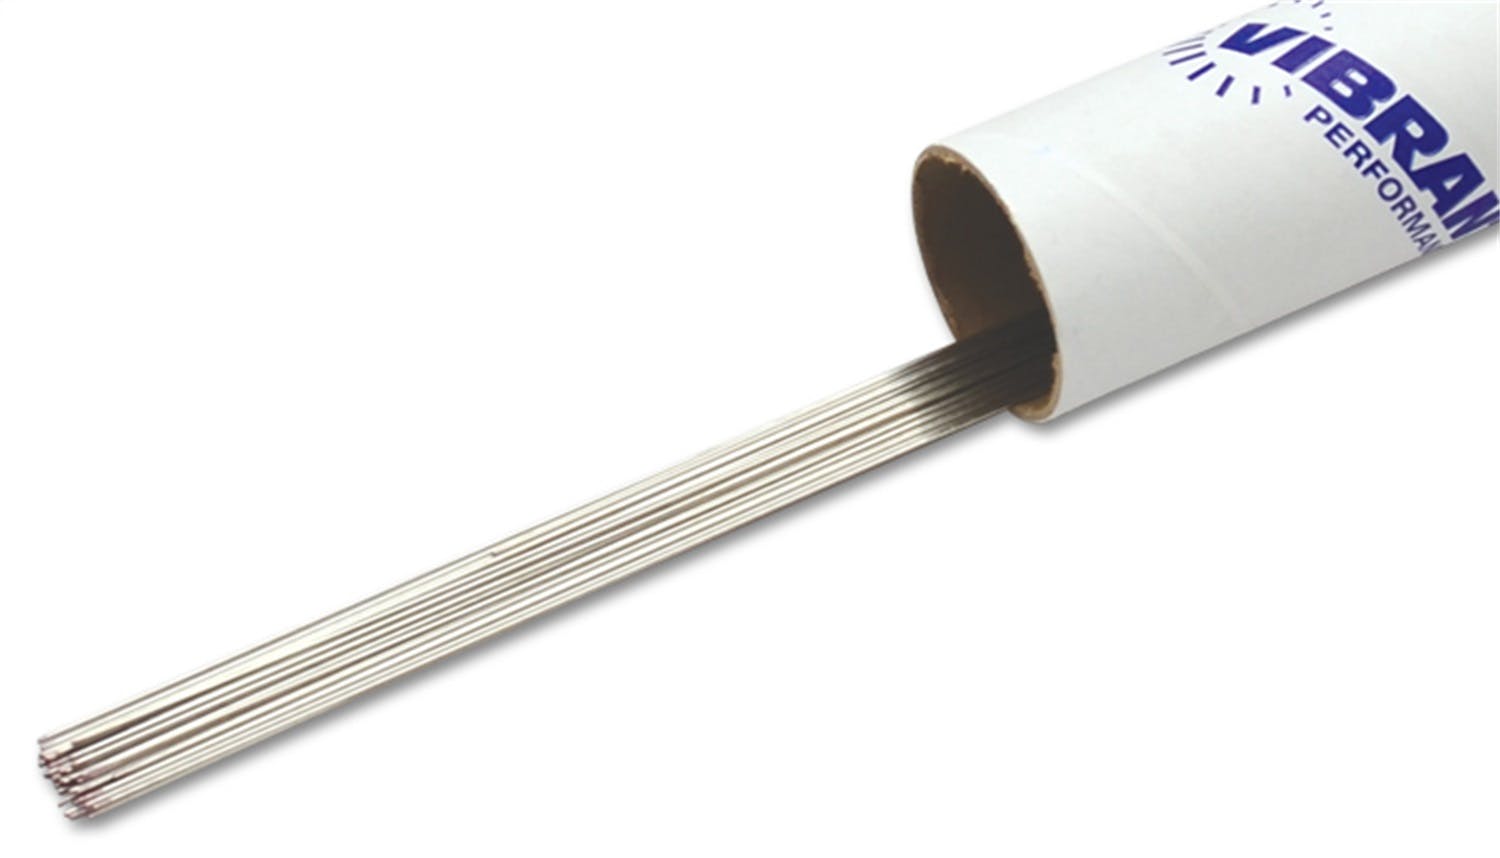 Vibrant Performance 29133 Wire Stainless ER308L - 0.035 inch Thick (0.9mm) - 39.5 inch Long Rod - 3lb box